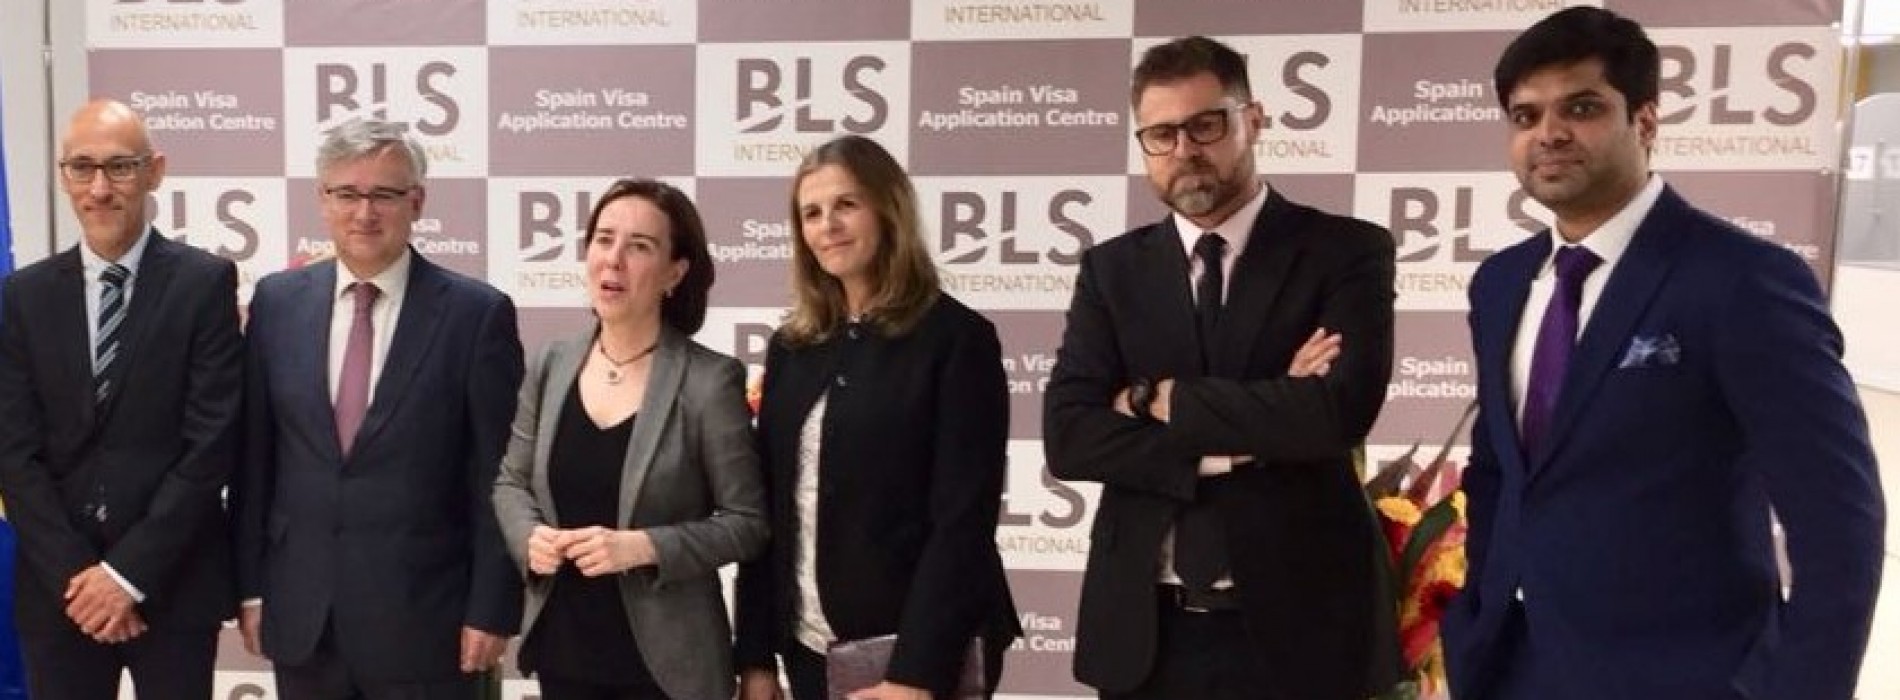 BLS International inaugurates Spain Visa Application Center in Moscow